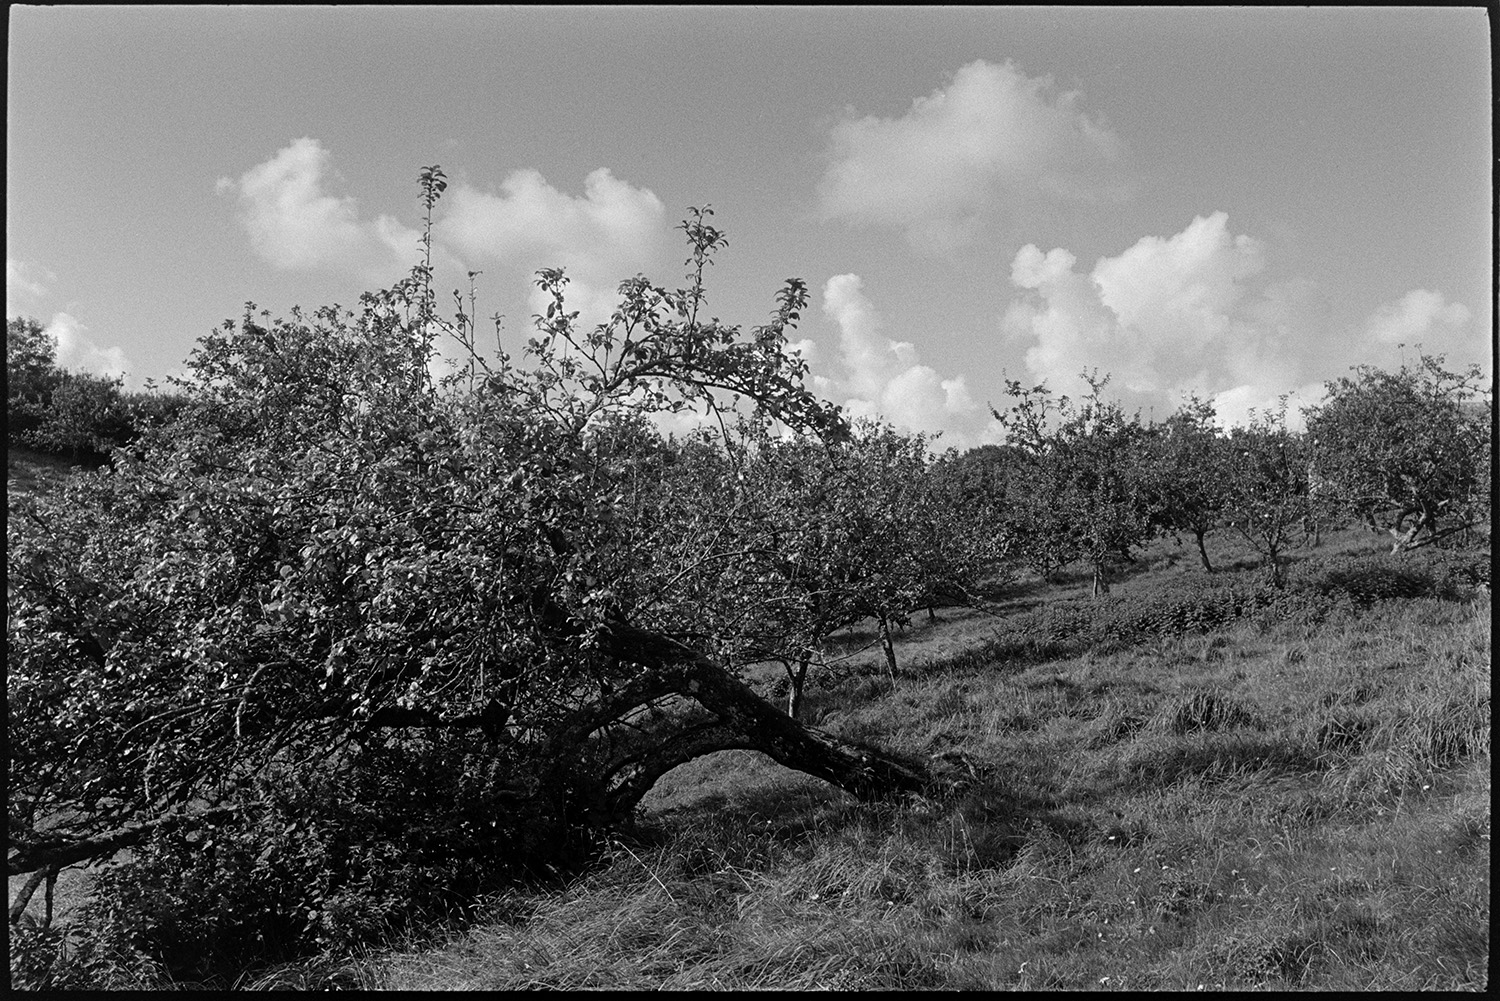 Orchard, Devon farm orchard. 
[Apple trees in an orchard at Spittle Farm, Chulmleigh. Clouds are visible in the sky above. A tree is the foreground has fallen over.]